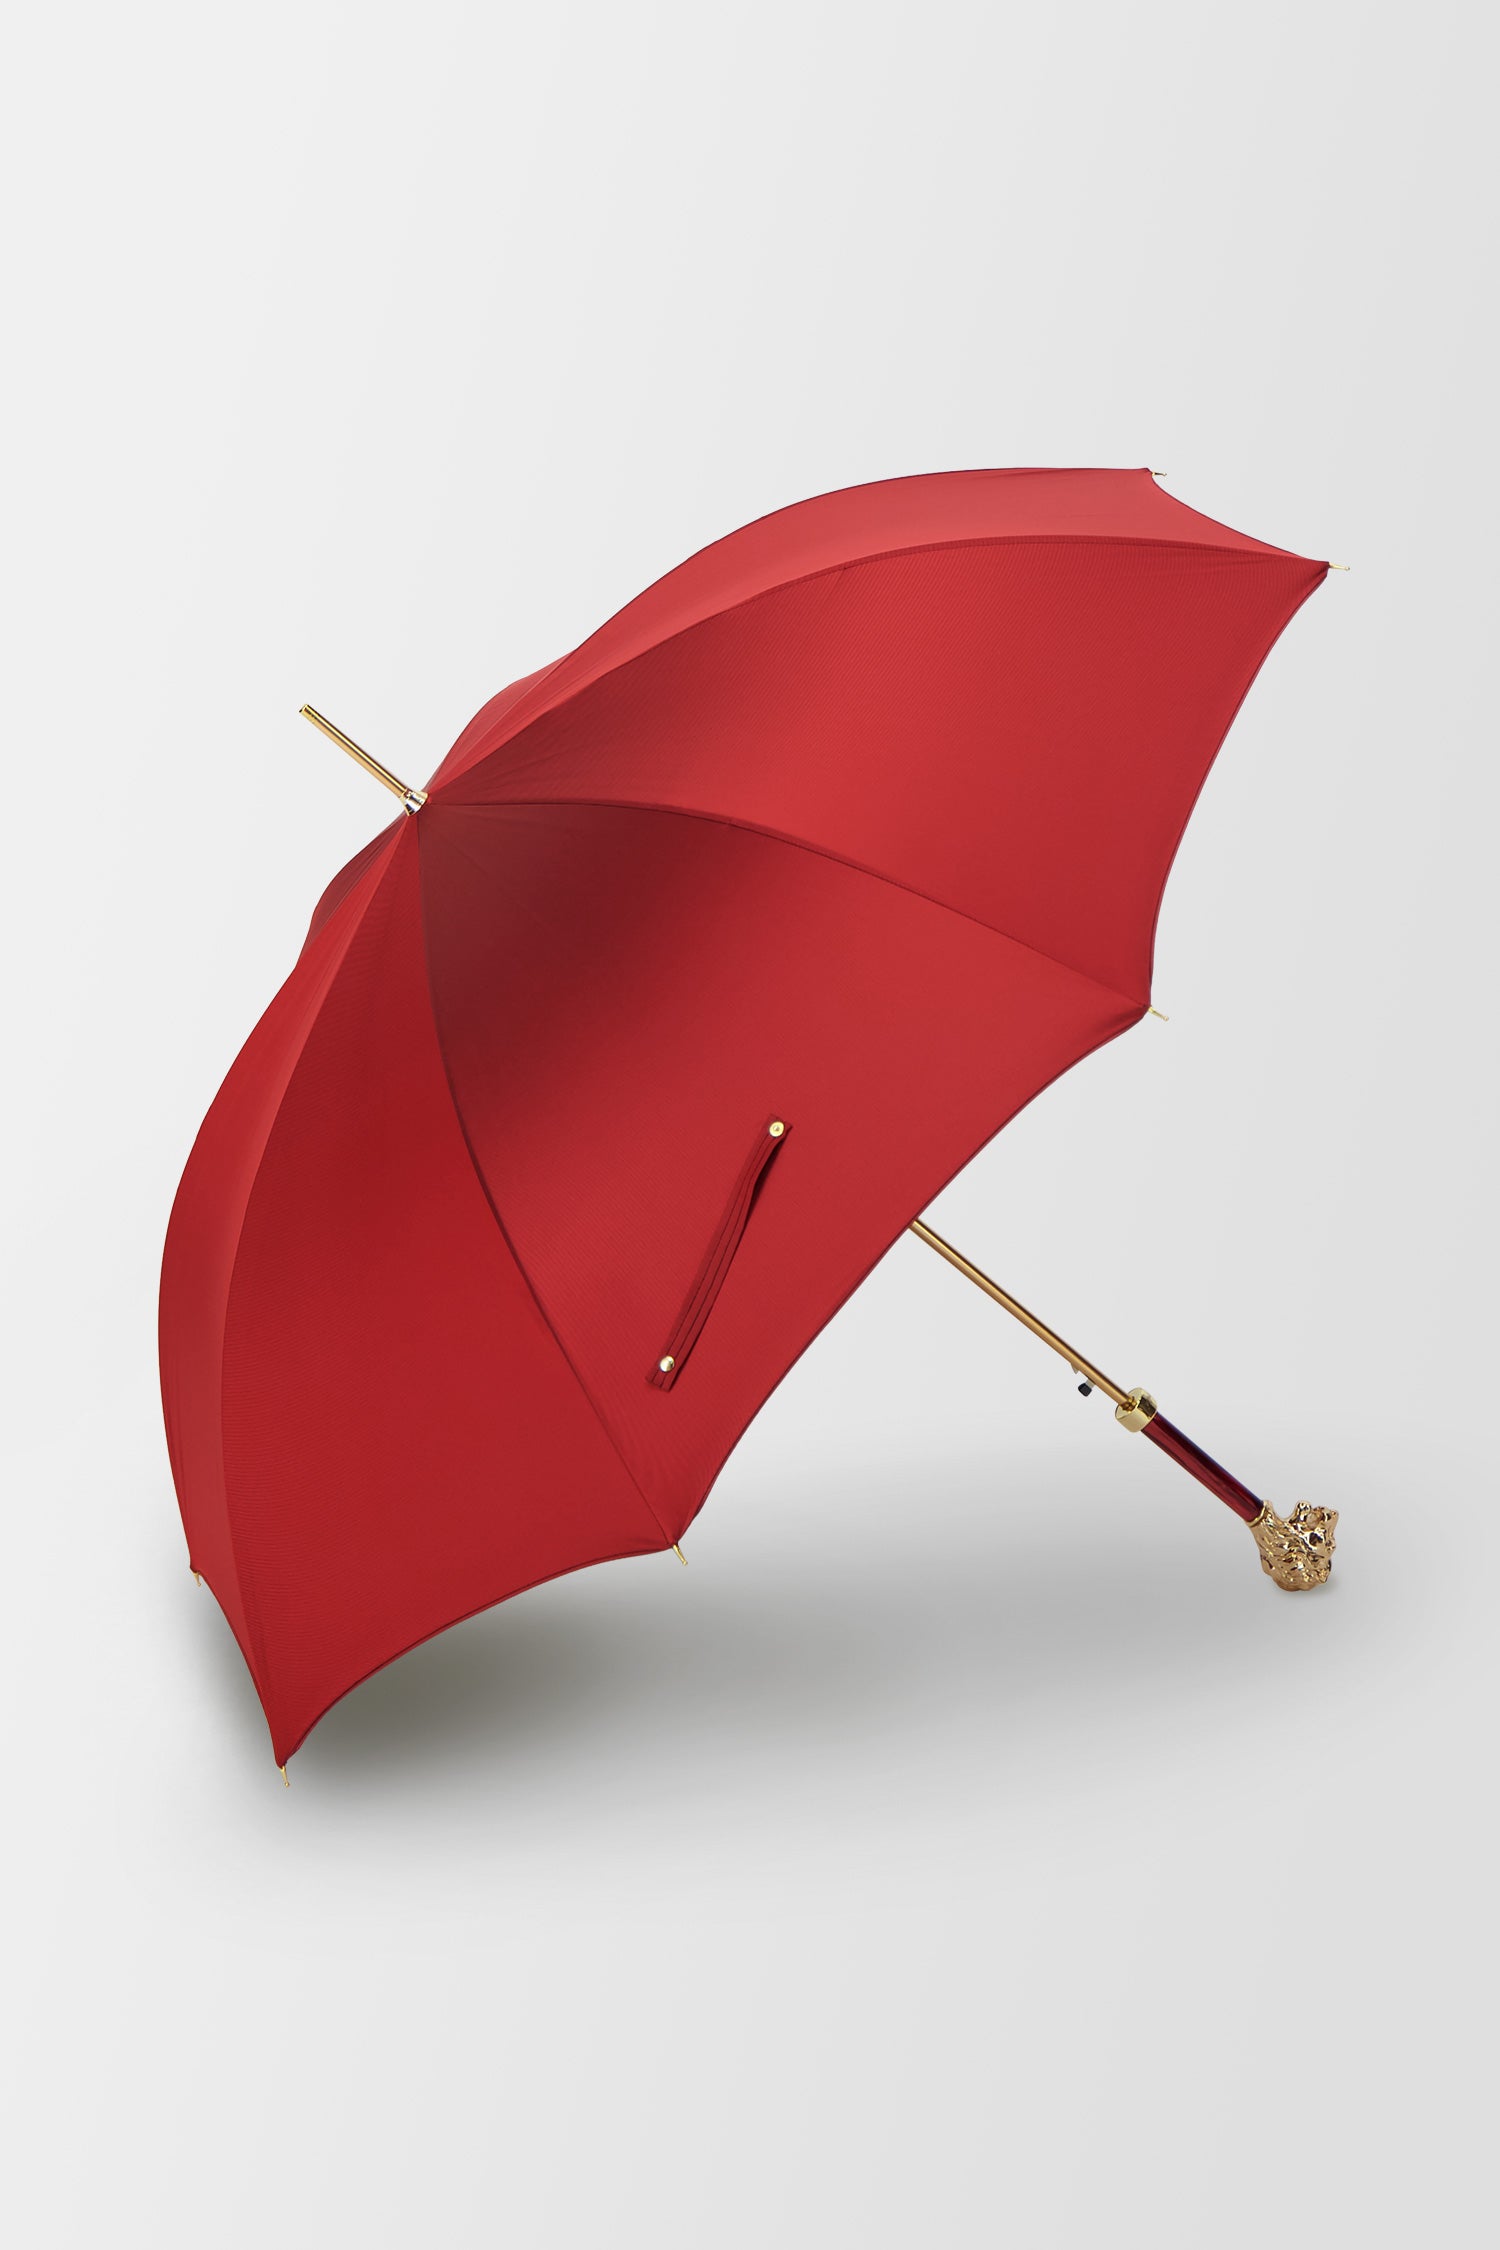 Pasotti Red Umbrella with Gold Lion Handle, with Case and Ring